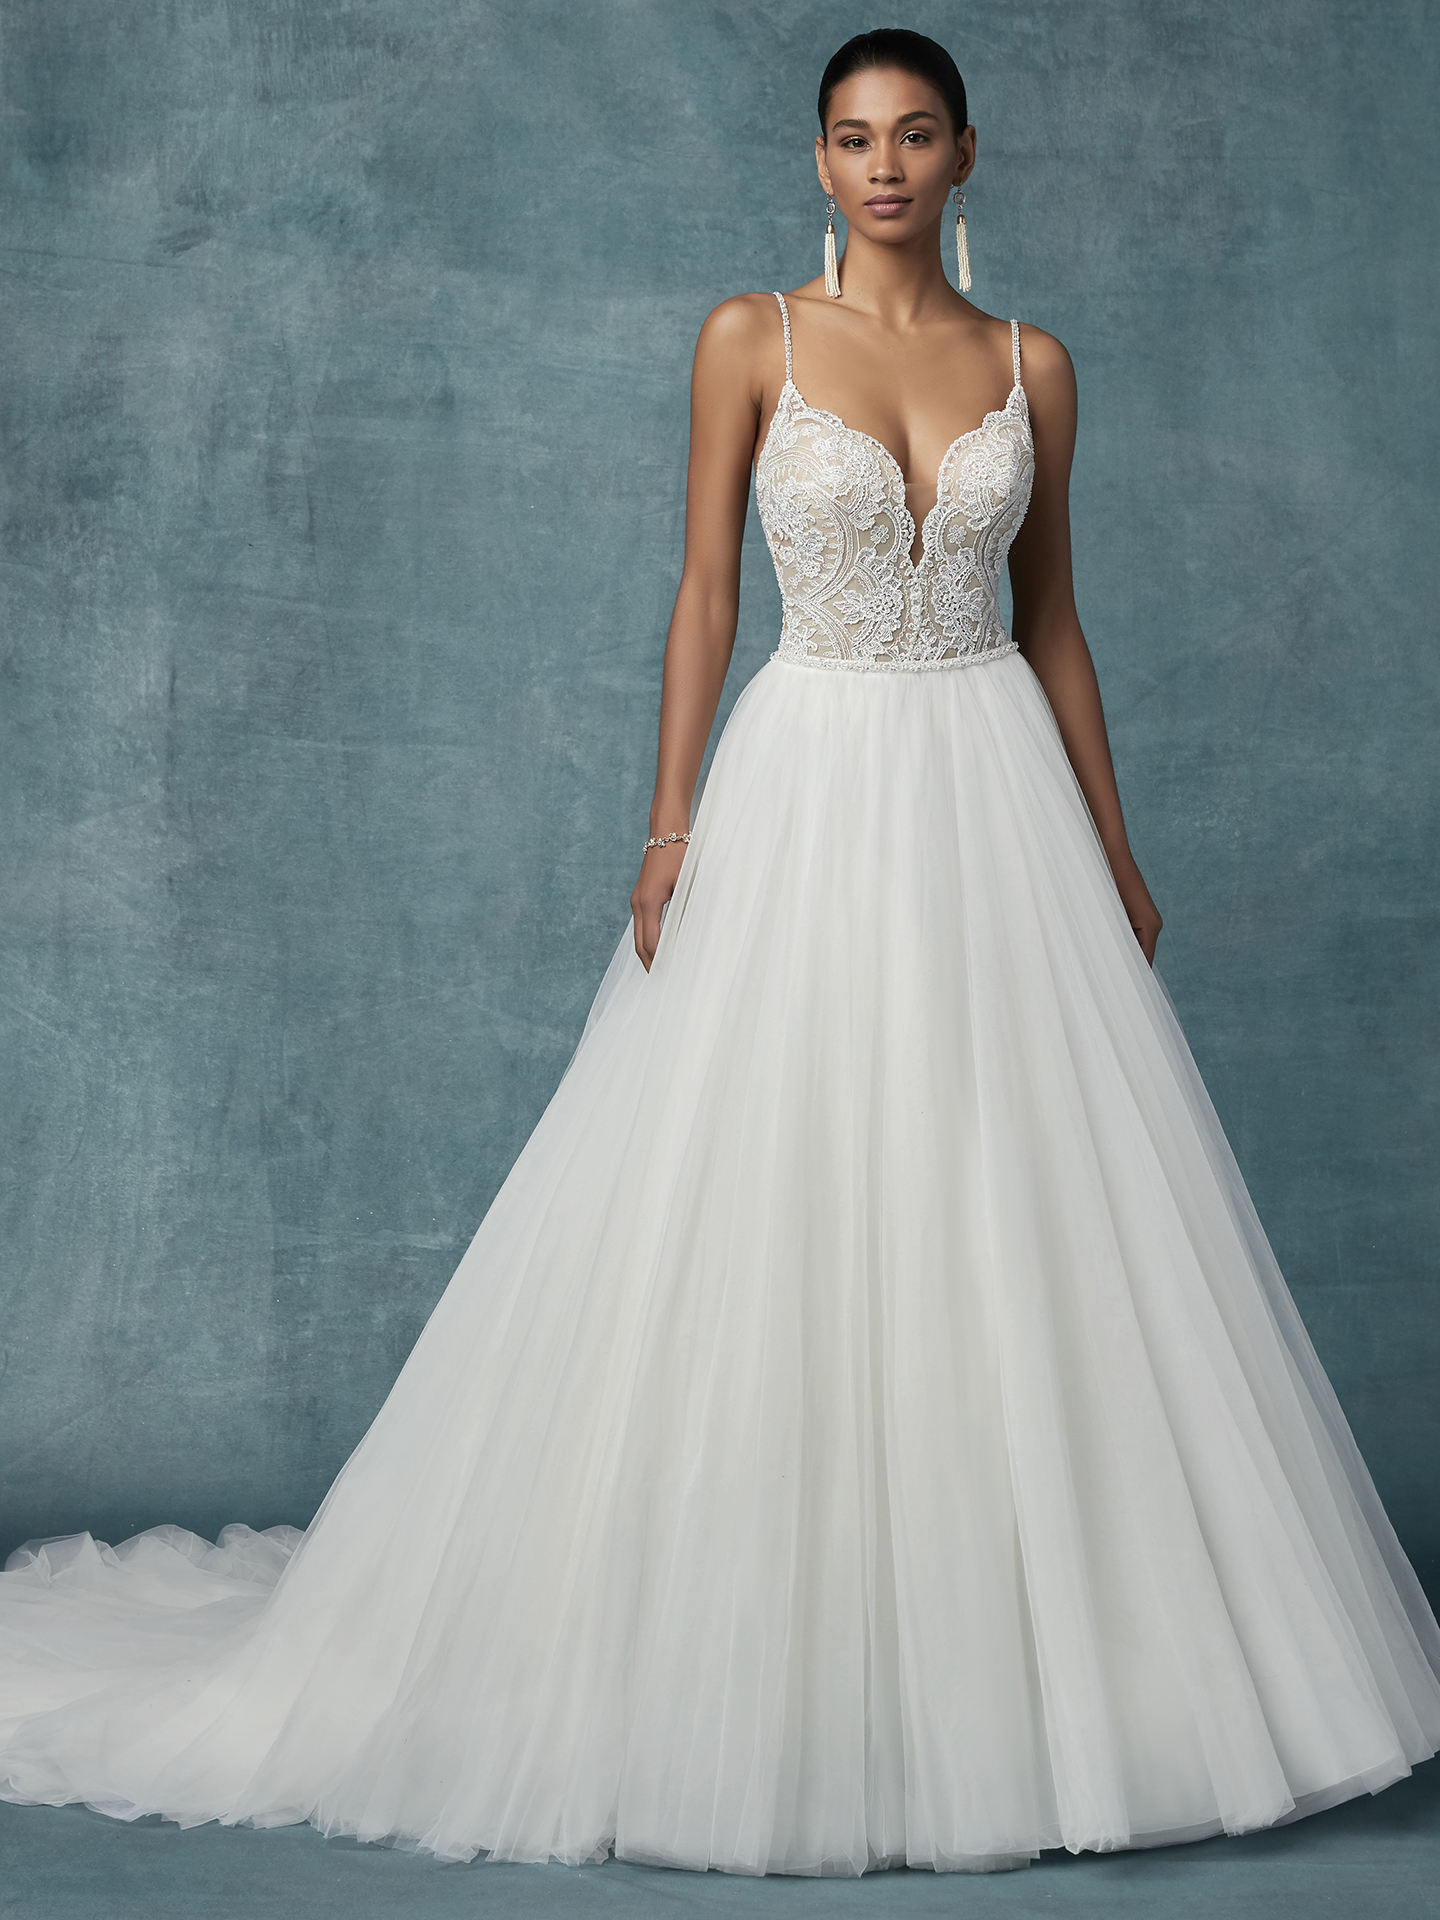 Ever After Bridal Buy or Hire Wedding Dresses in Cape Town